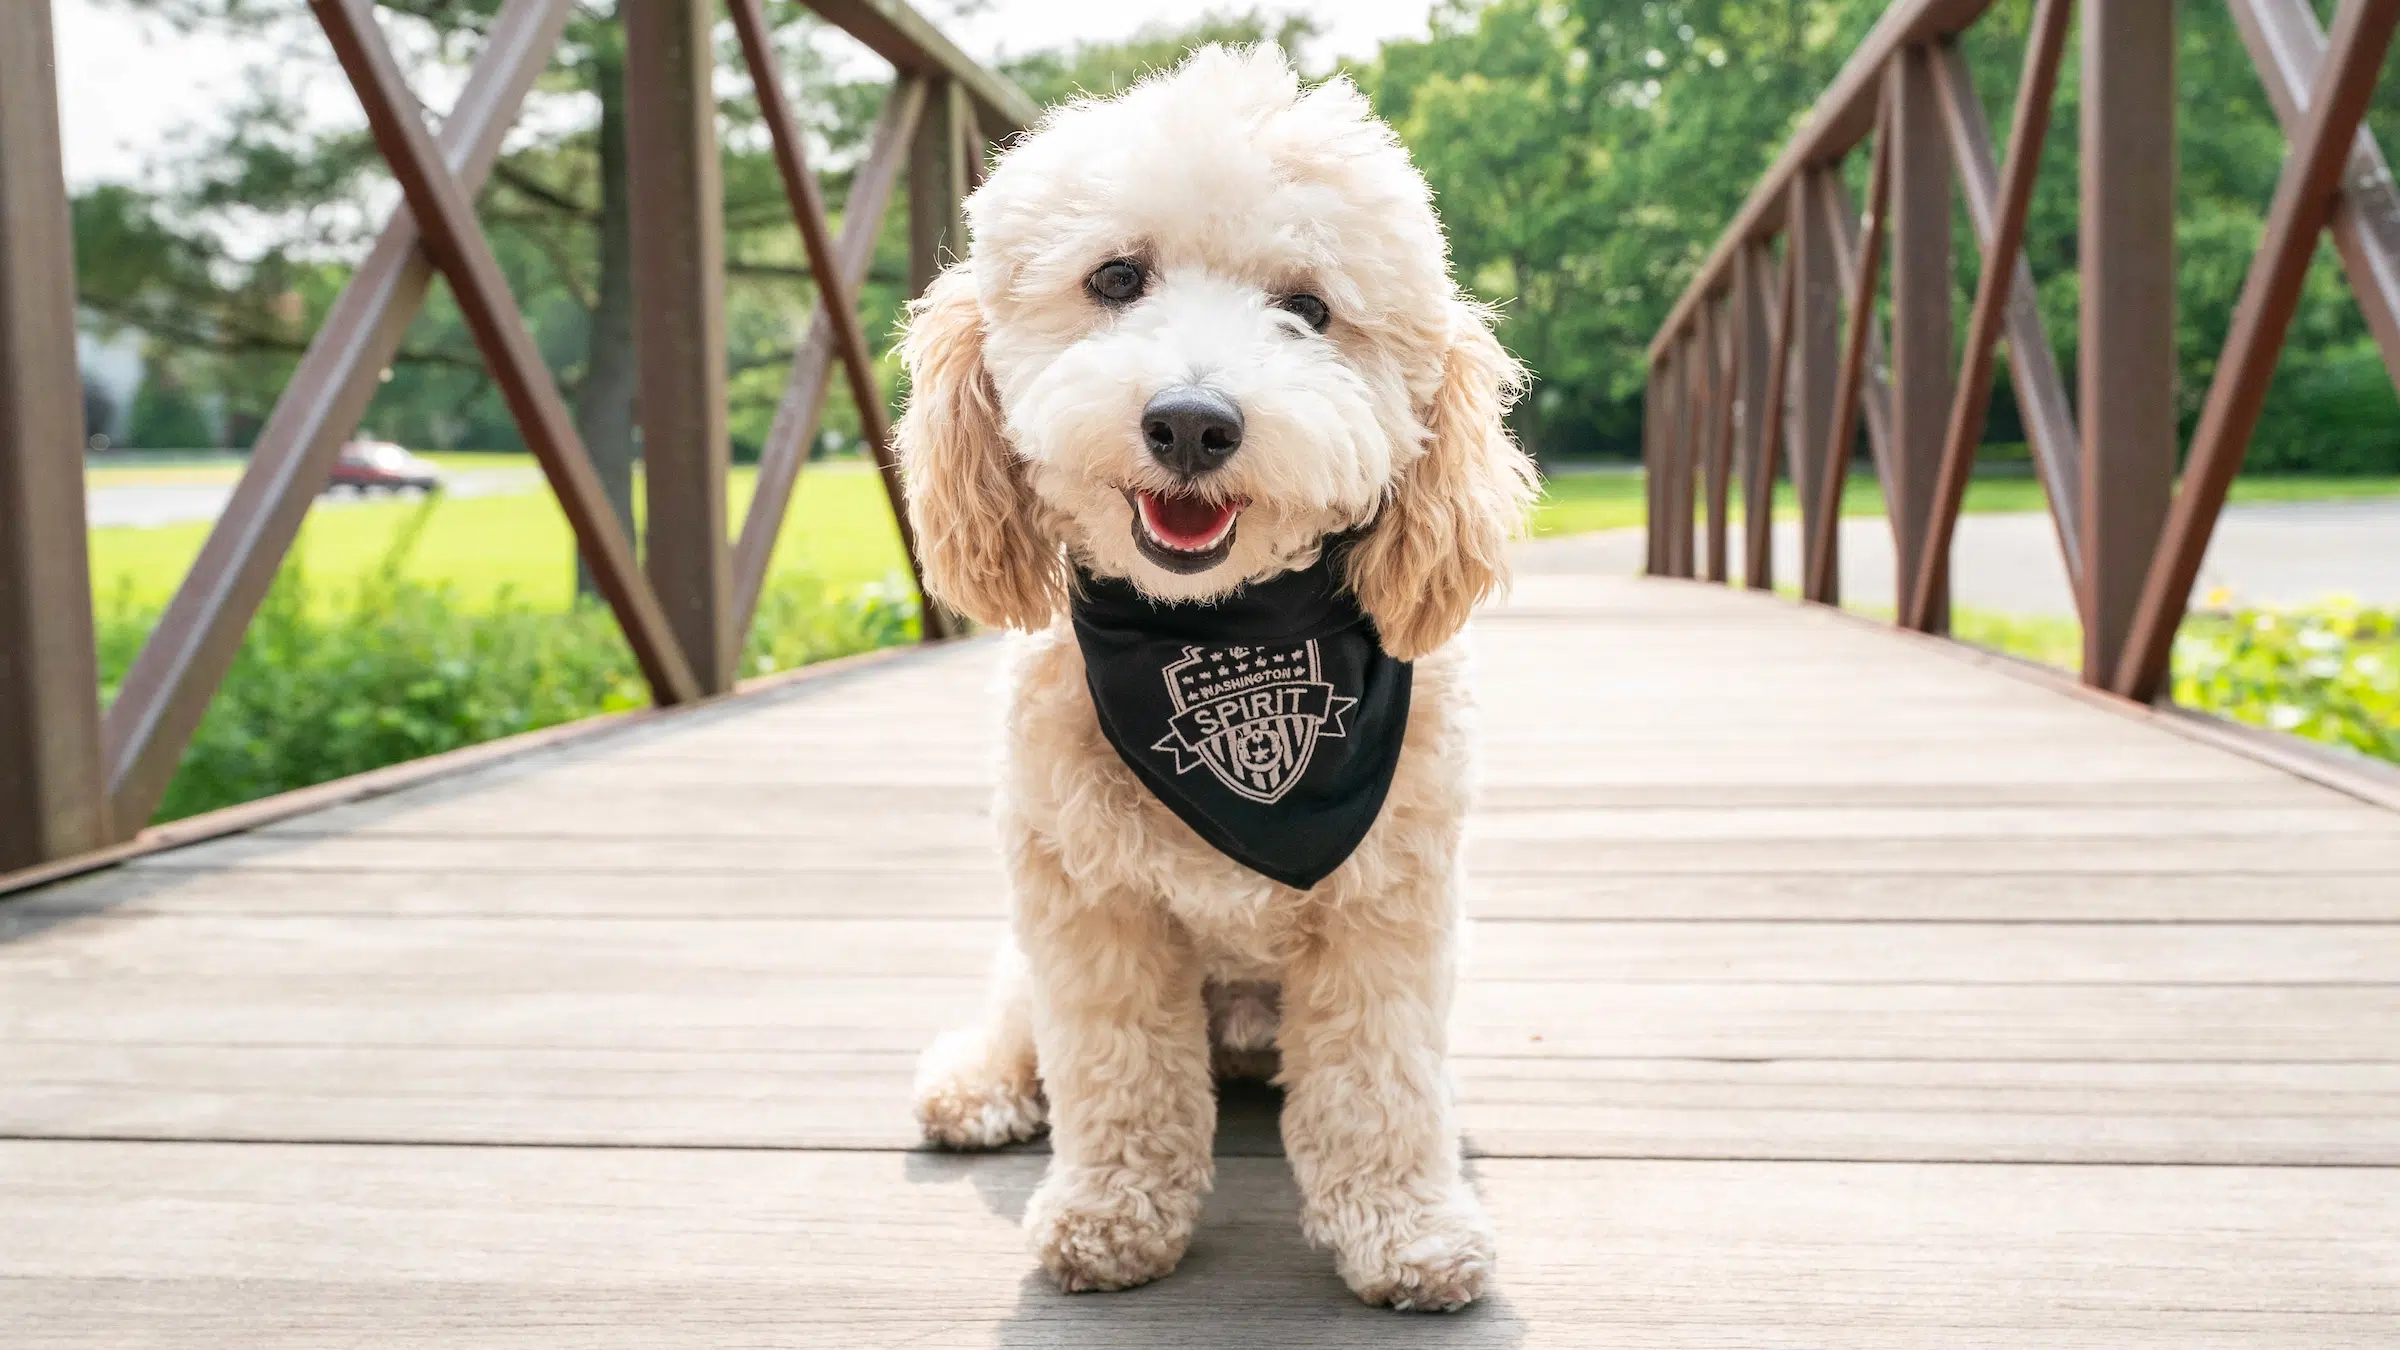 A small, white, fluffy dog wearing a black bandana with a Spirit crest on it sits on a wooden bridge.